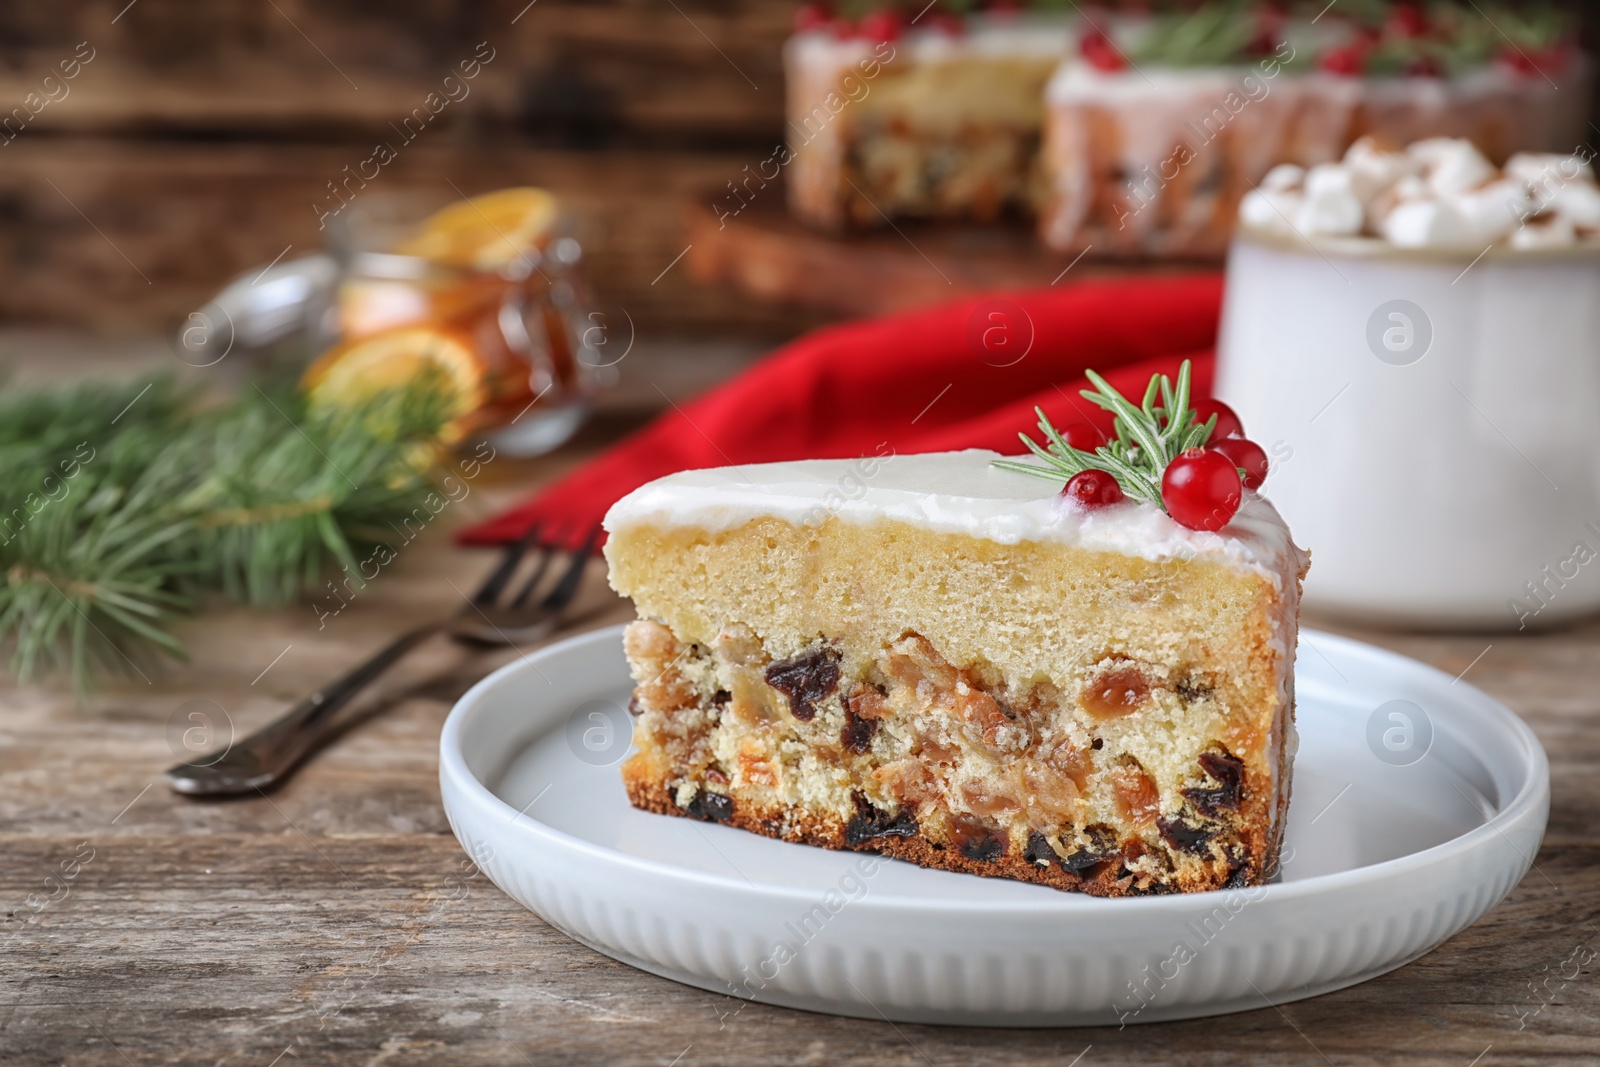 Photo of Slicetraditional Christmas cake decorated with rosemary and cranberries on wooden table